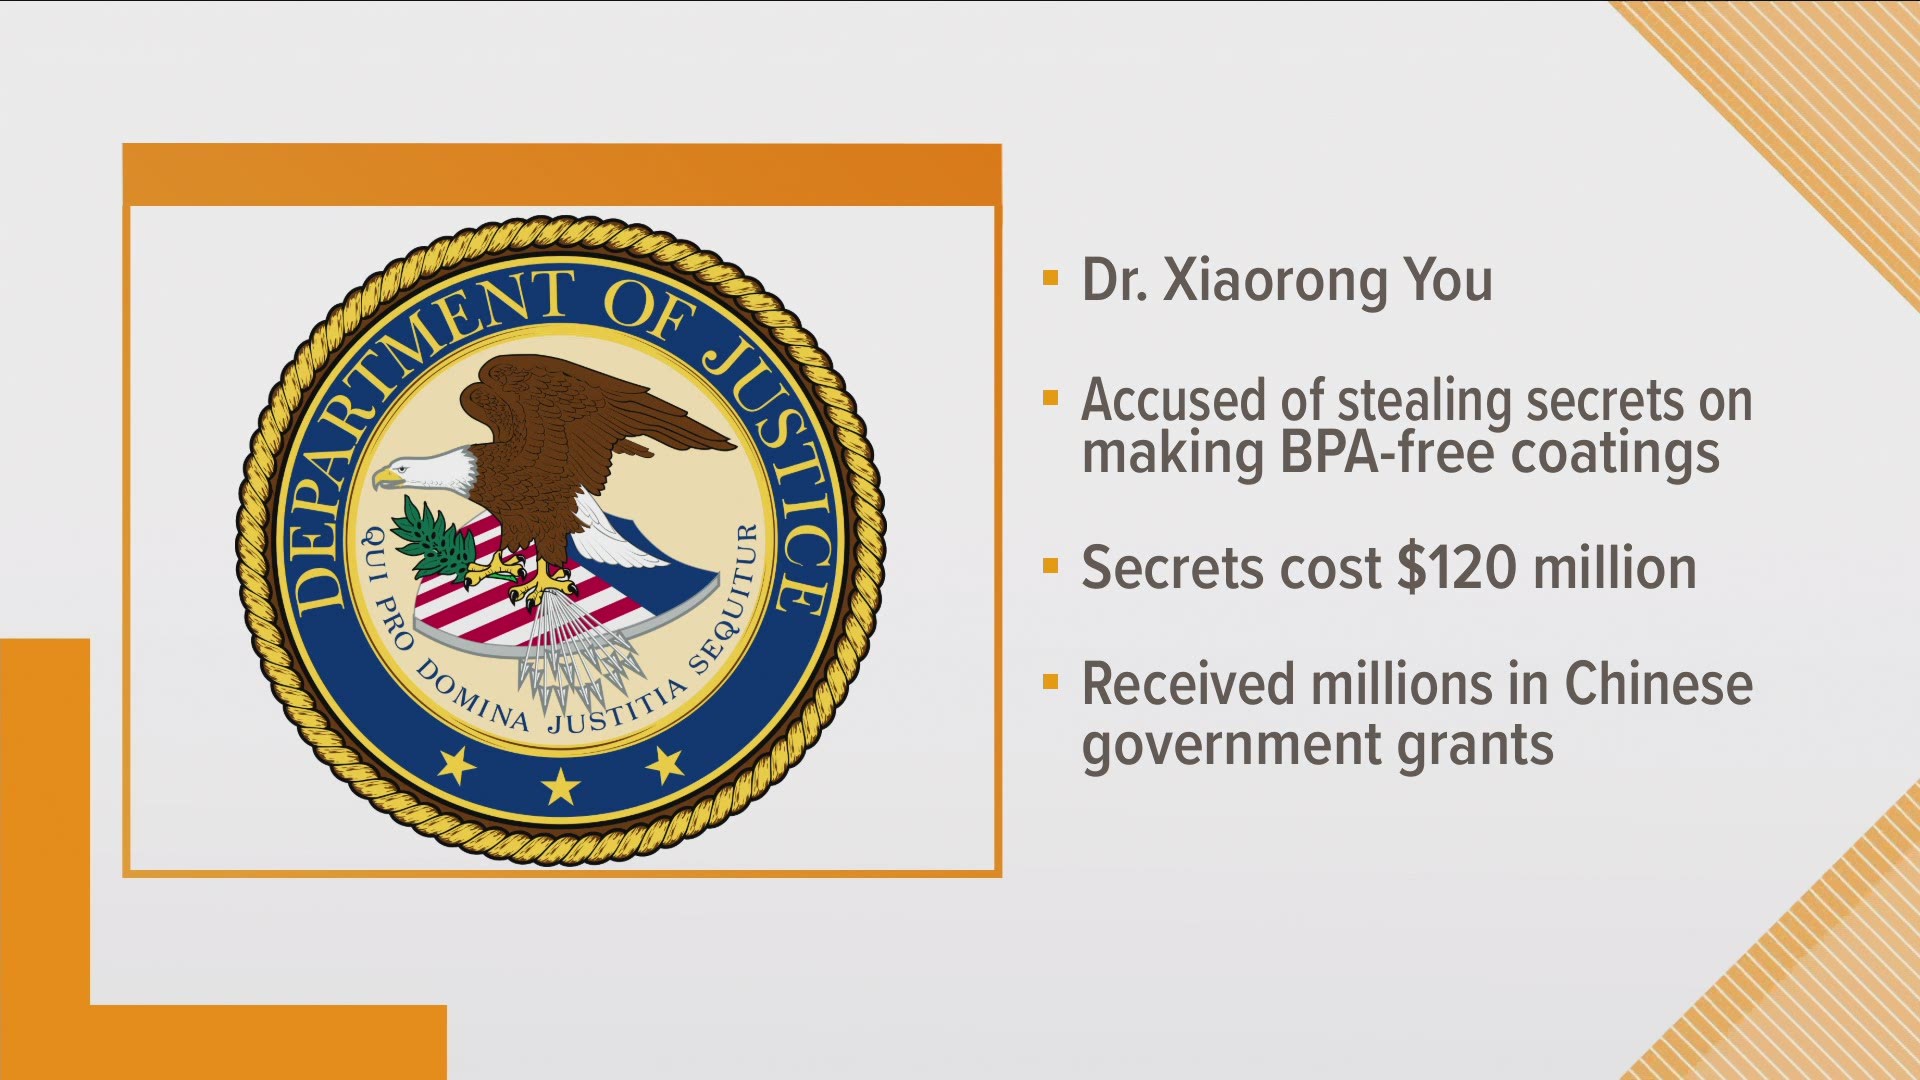 Dr. Xiaorong You, 59, from Michigan, was convicted of theft of trade secrets after stealing secrets on making BPA-free coatings and starting a company in China.